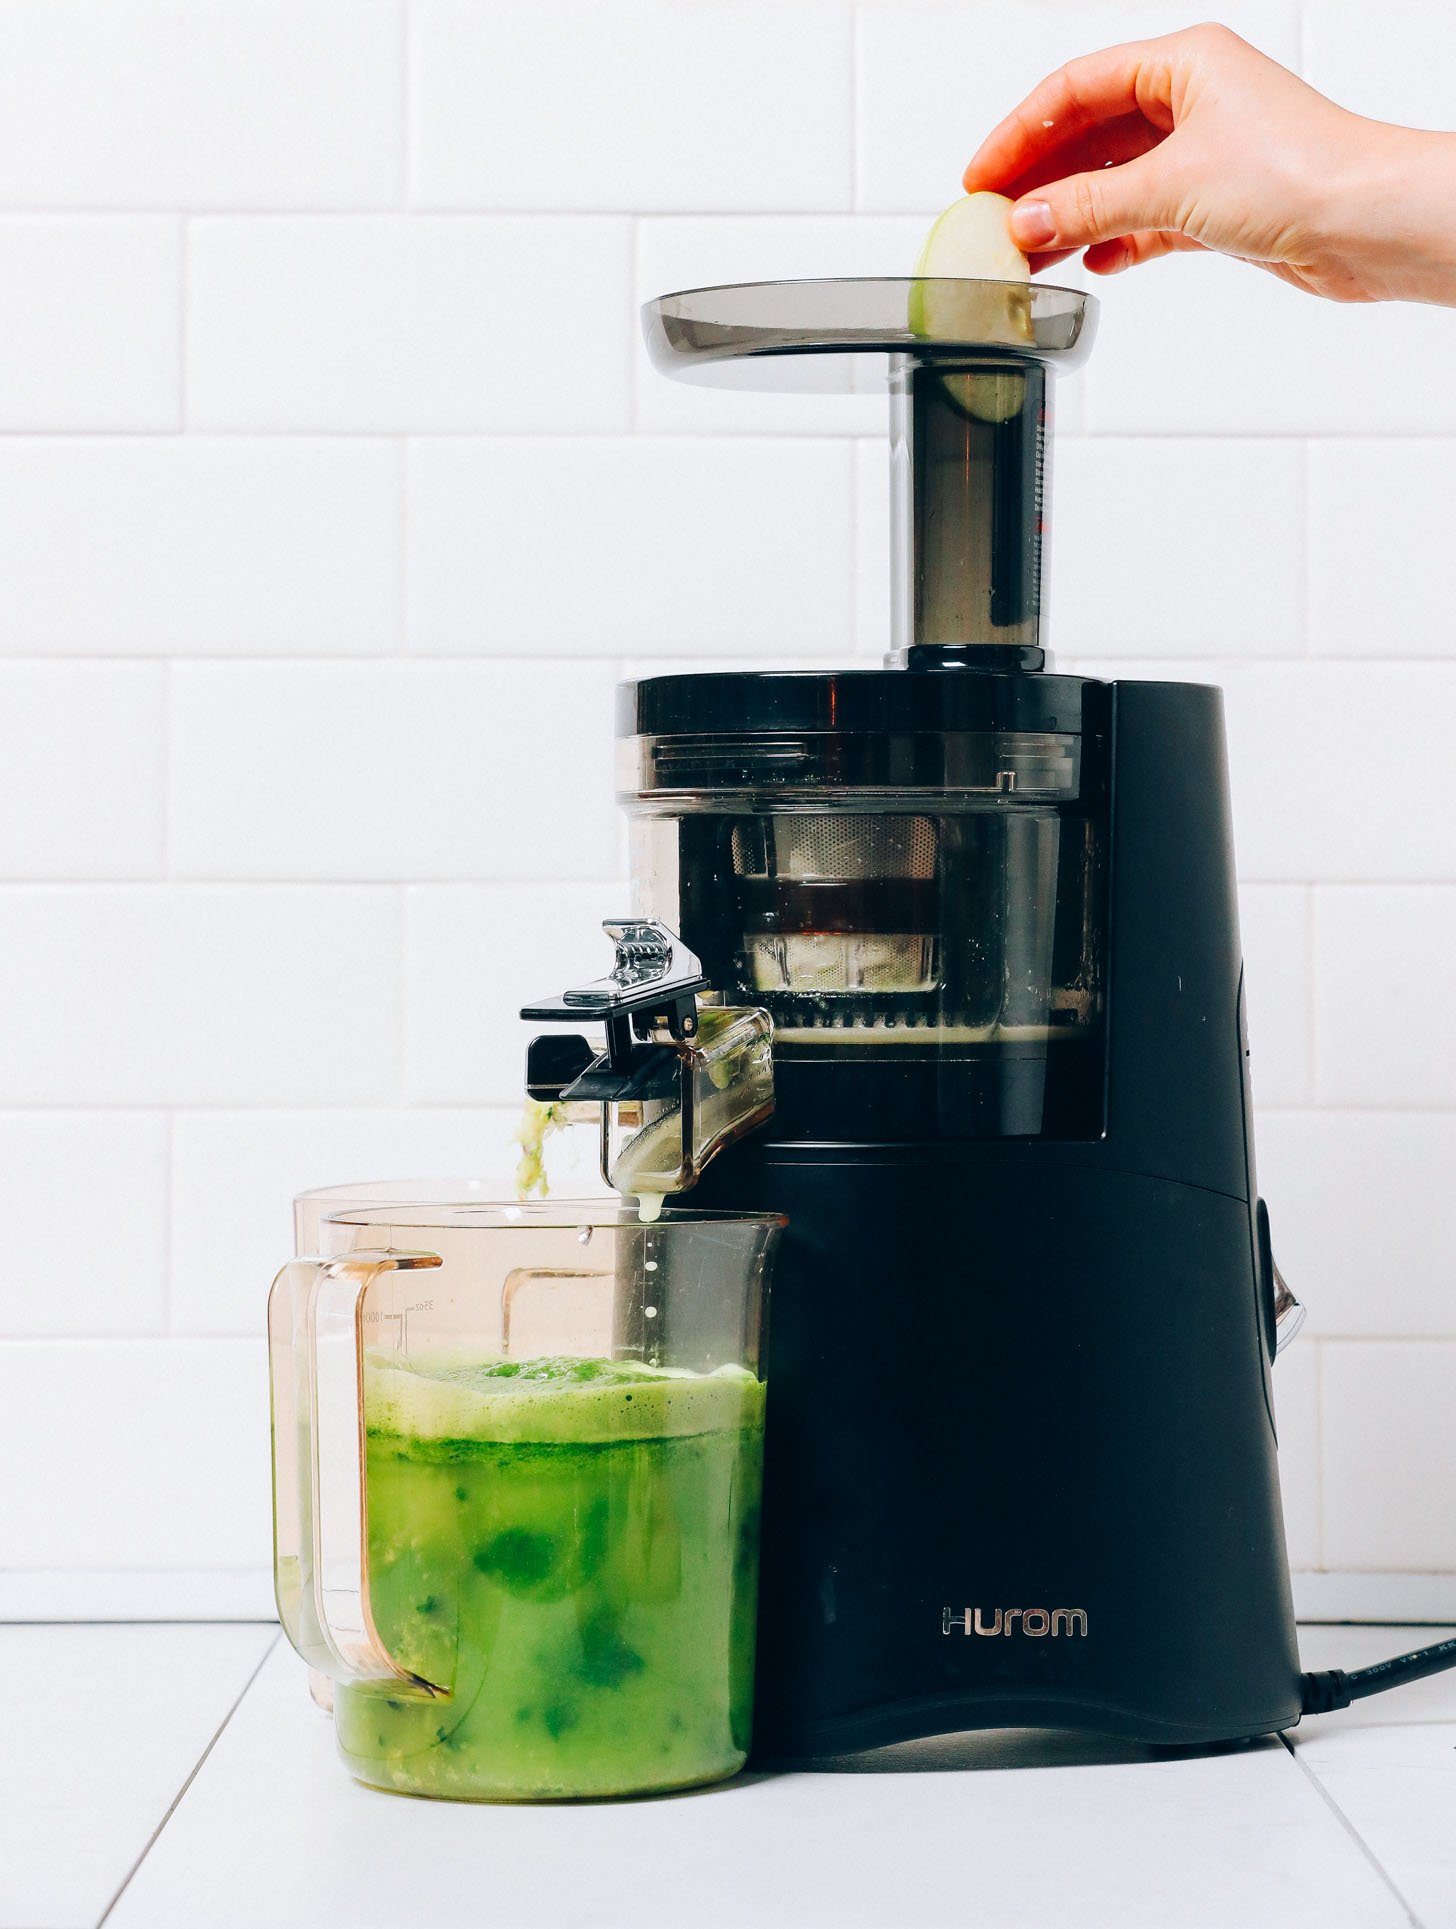 Adding apple to a Hurom juicer to make our Easy Green Juice recipe